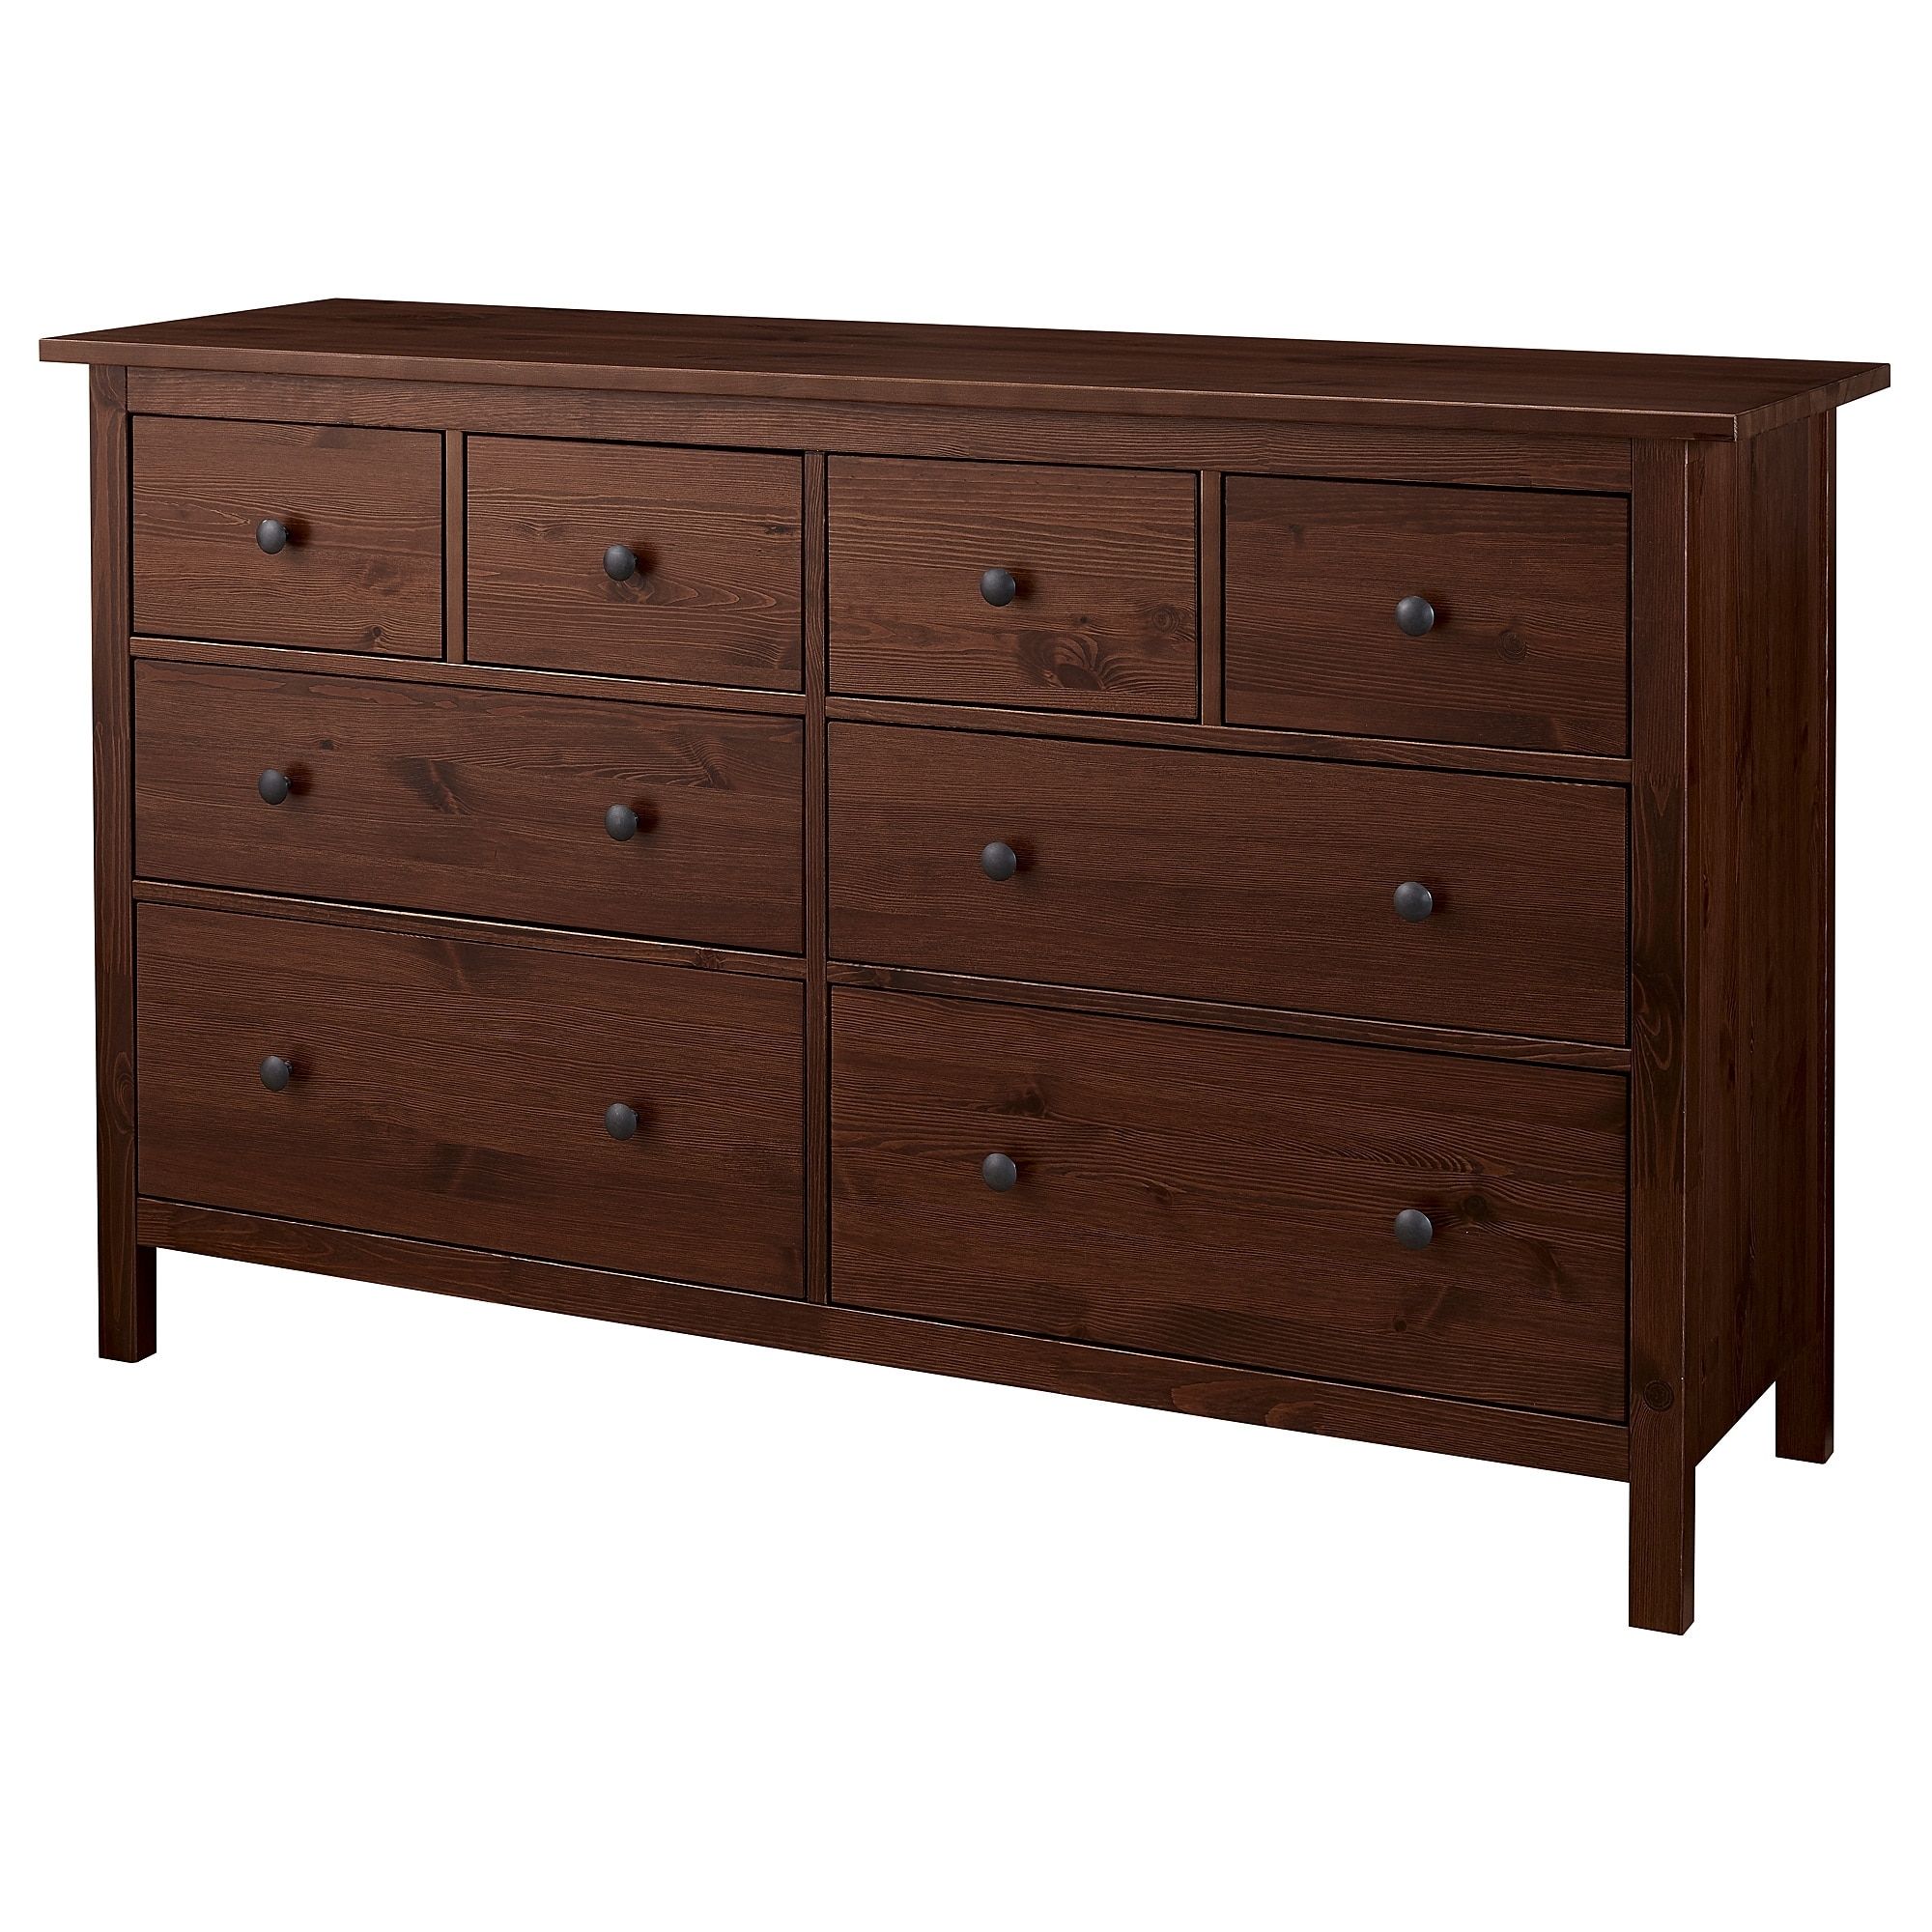 Hemnes 8 Drawer Dresser – Dark Gray Stained, 63x37 3/8 " – Ikea With Regard To Most Recent Oil Pale Finish 4 Door Sideboards (View 18 of 20)